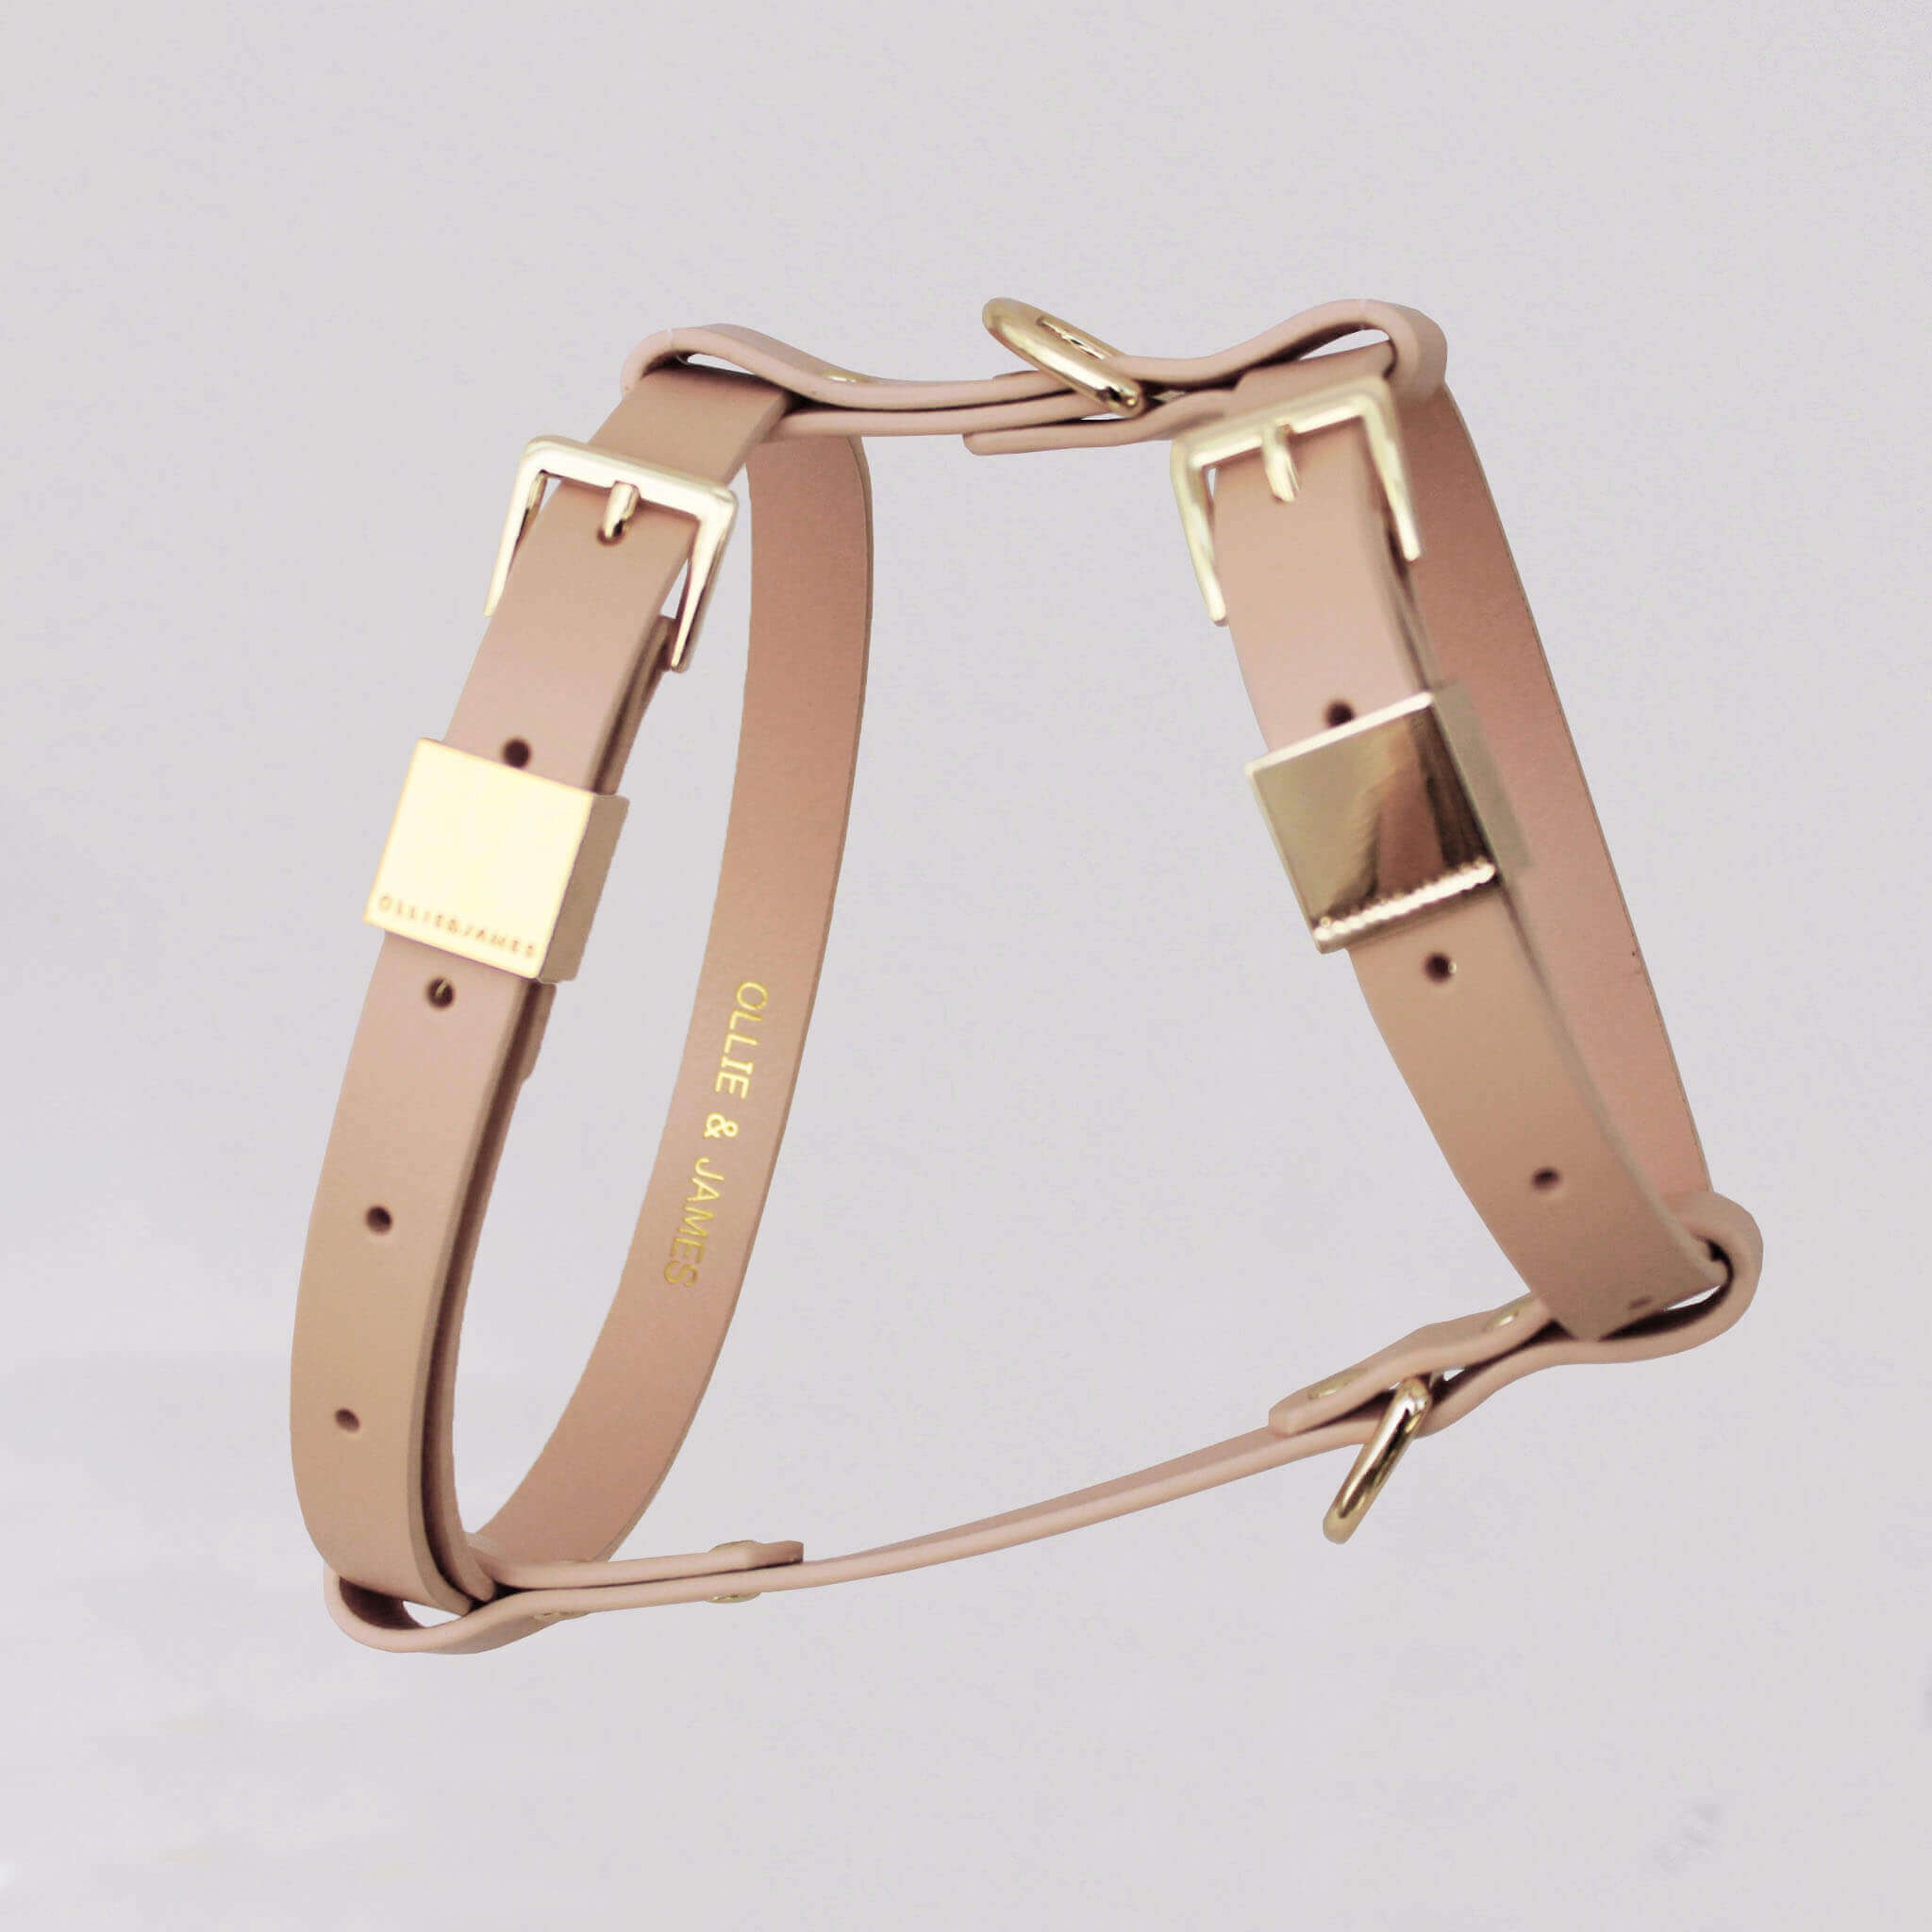 Dog Collar - Chewy Louie in Pink or Blue [IDPC115] - $29.95